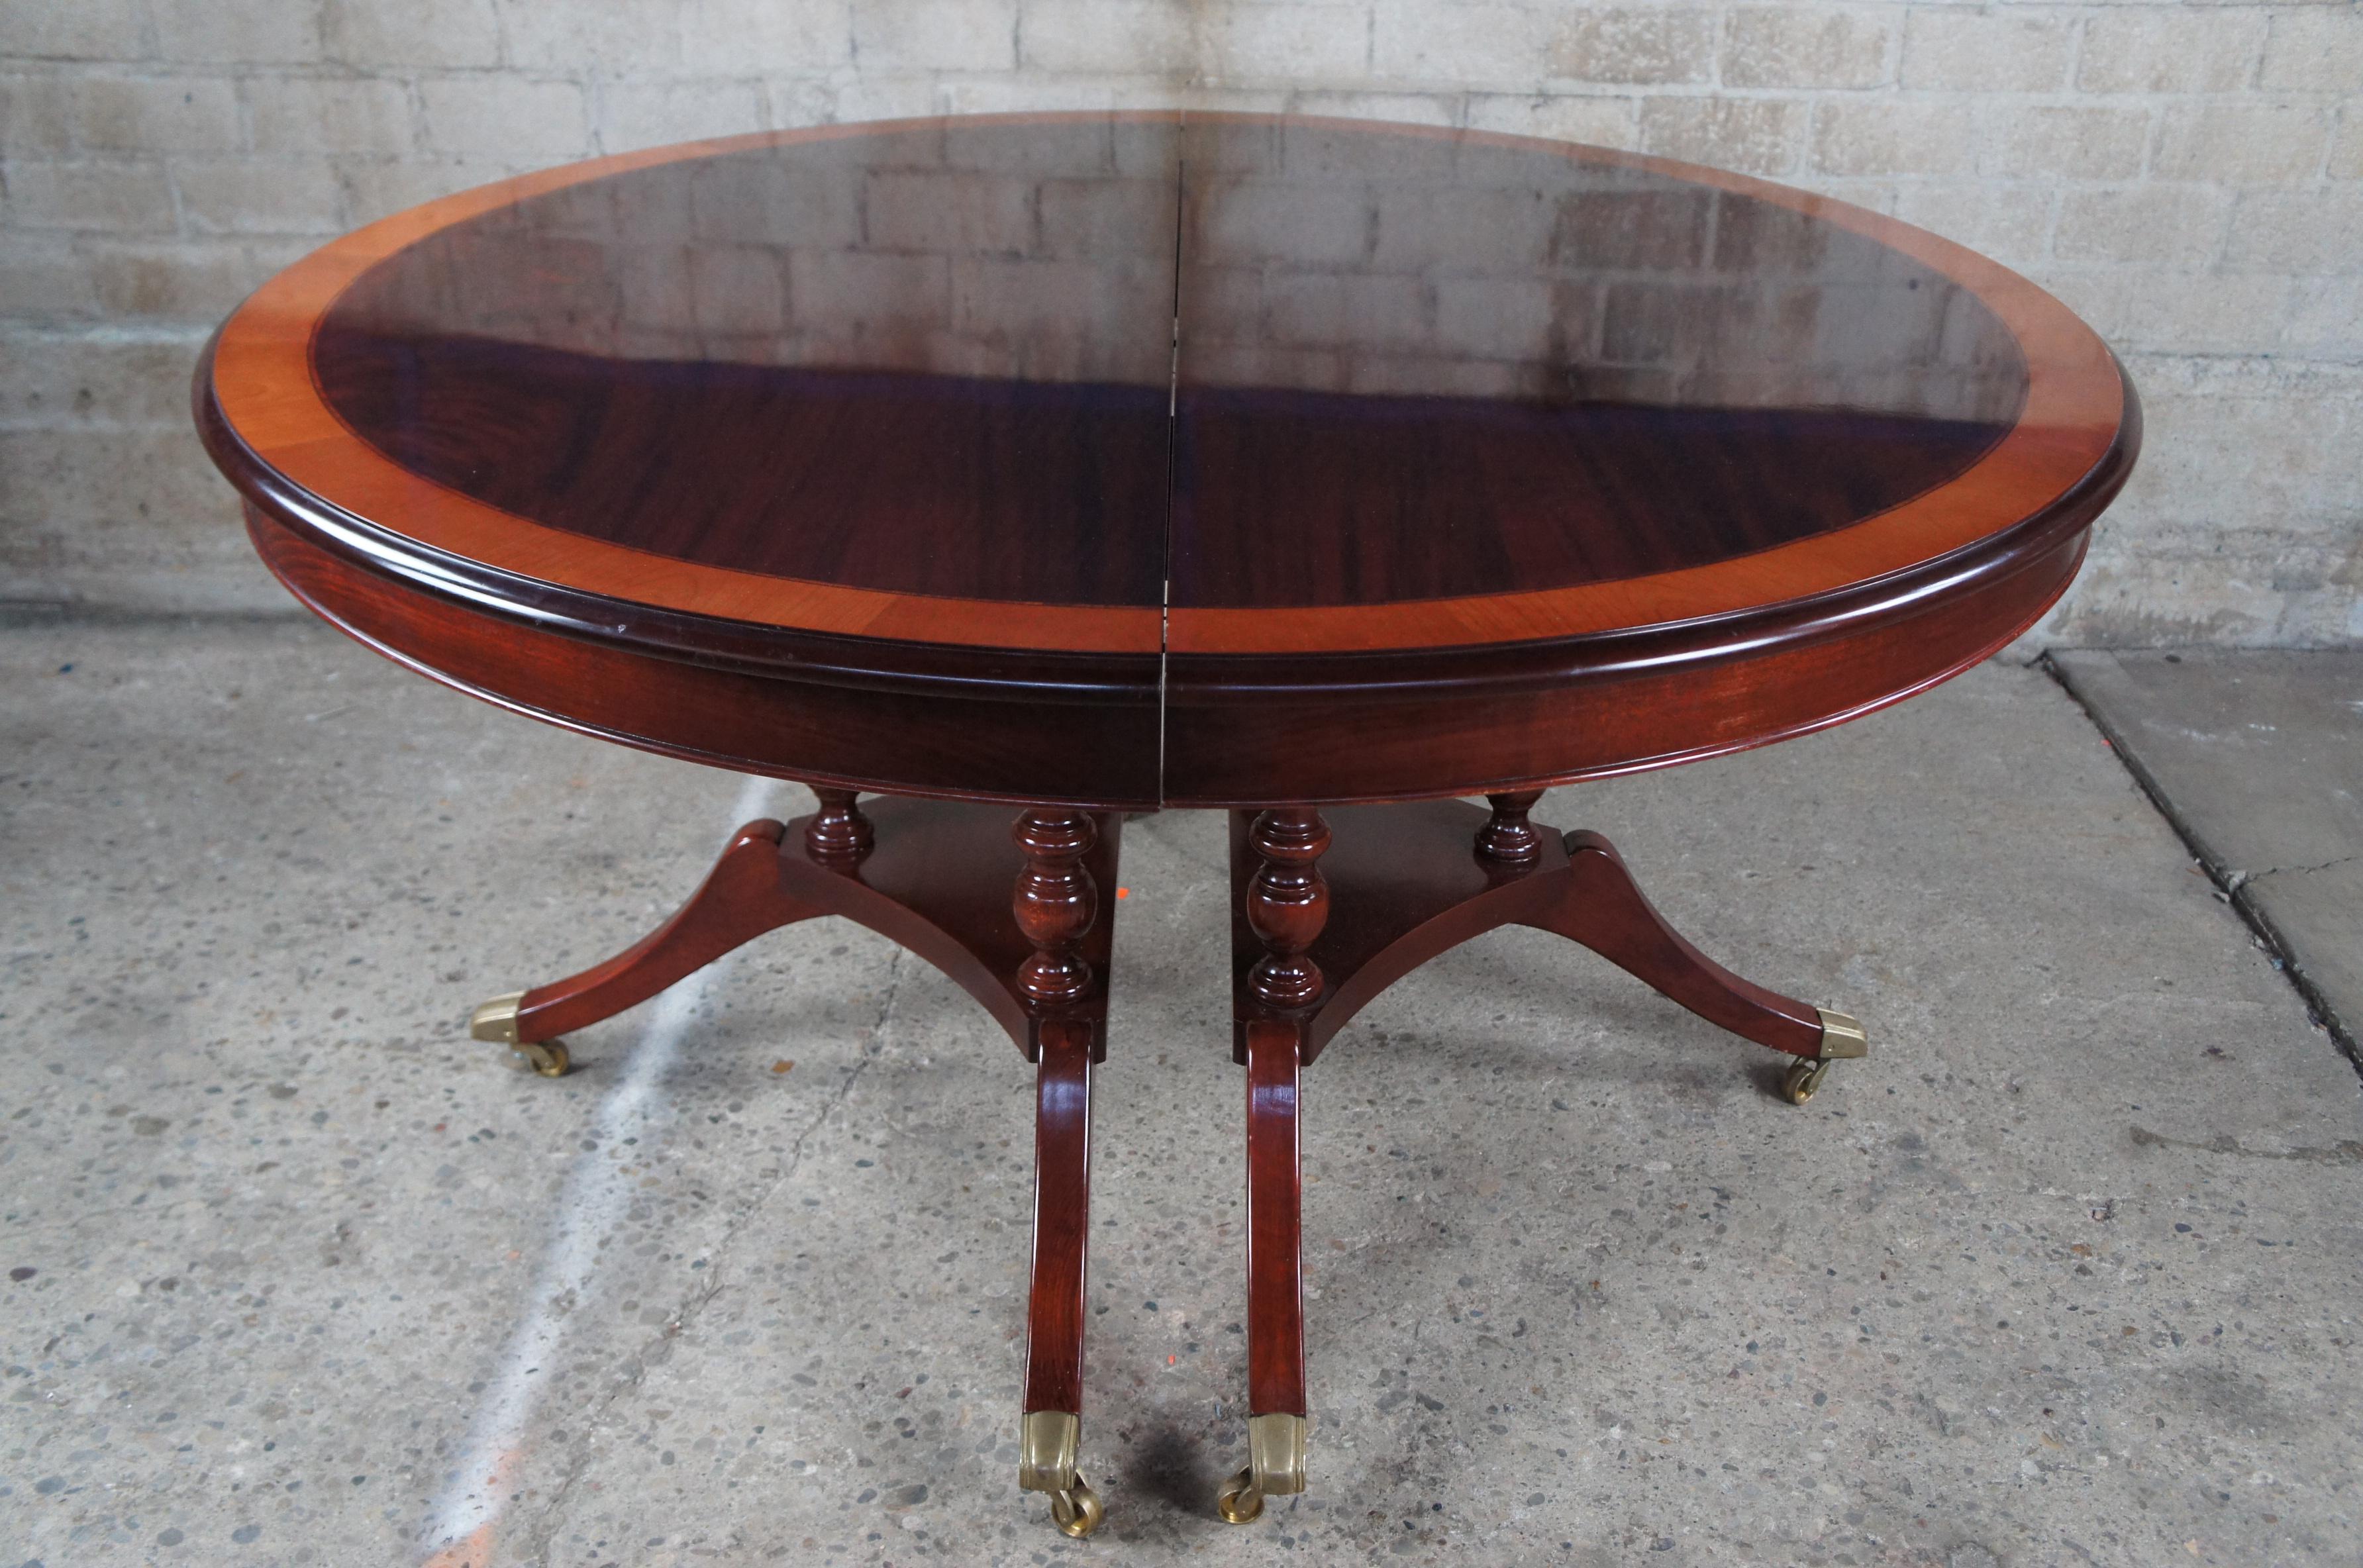 20th Century Vtg 18th Century Style Flame Mahogany Round Extendable Pedestal Dining Table